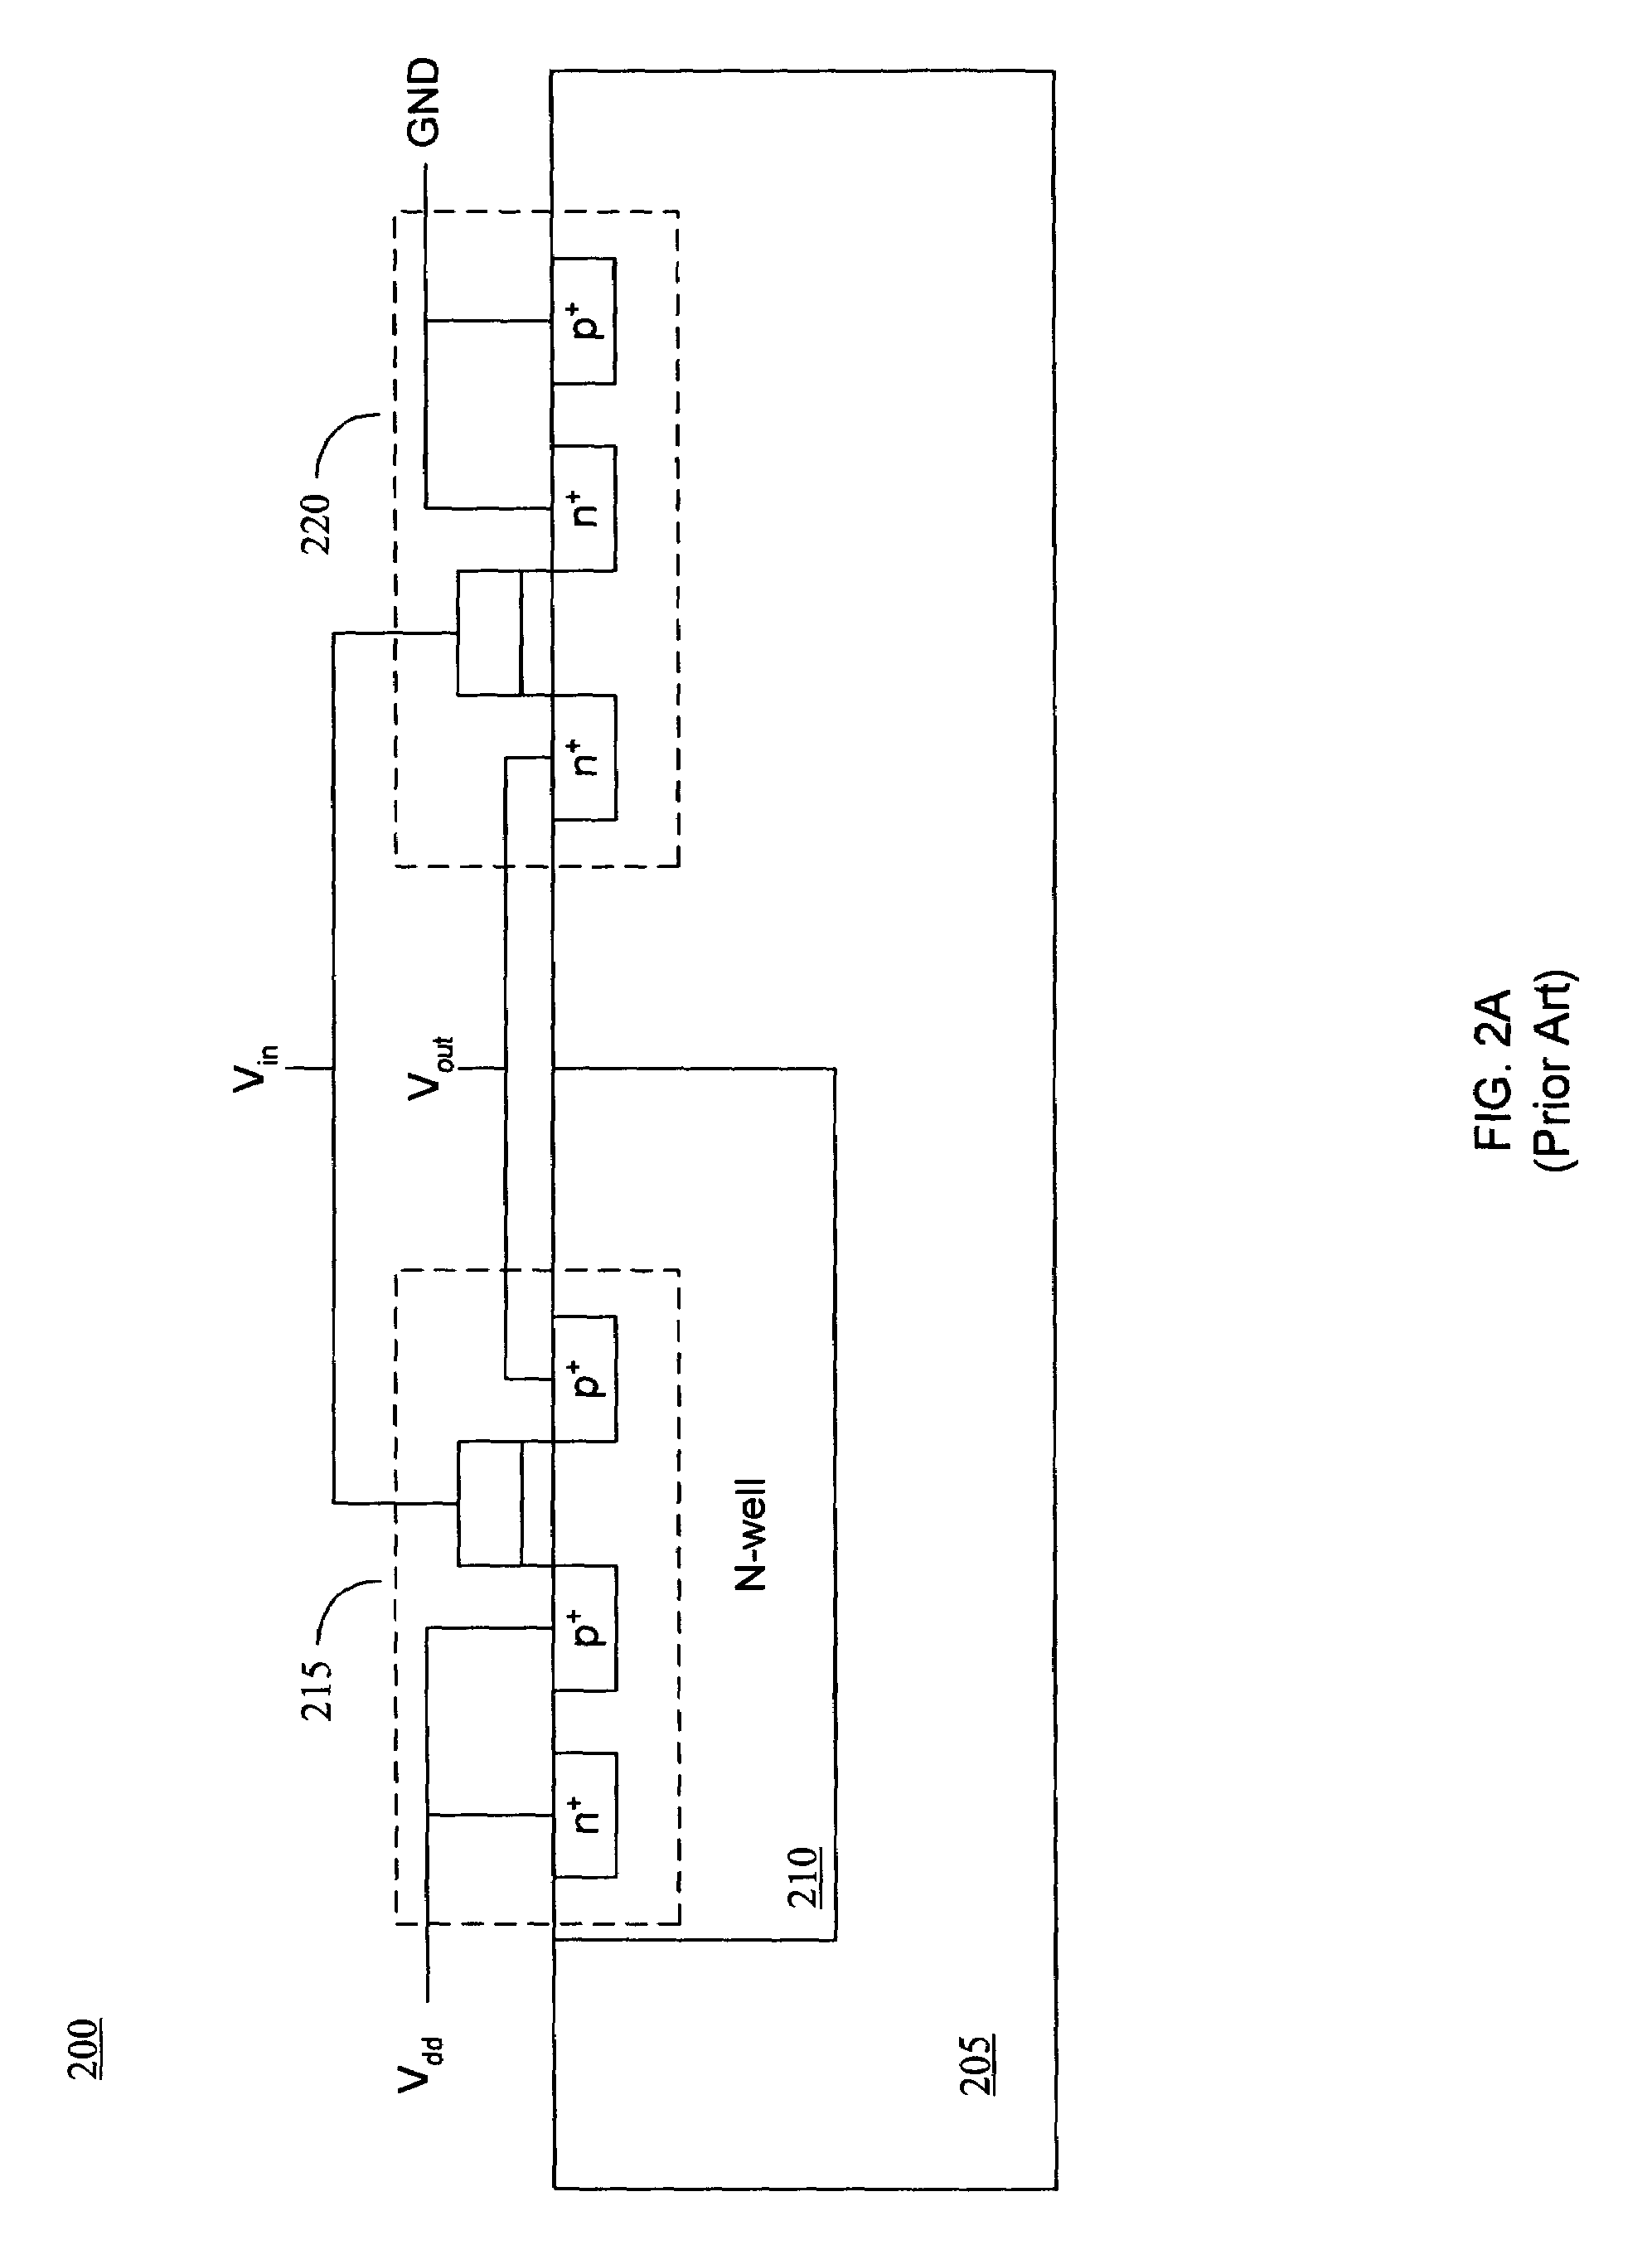 Structure and method for enhanced performance in semiconductor substrates